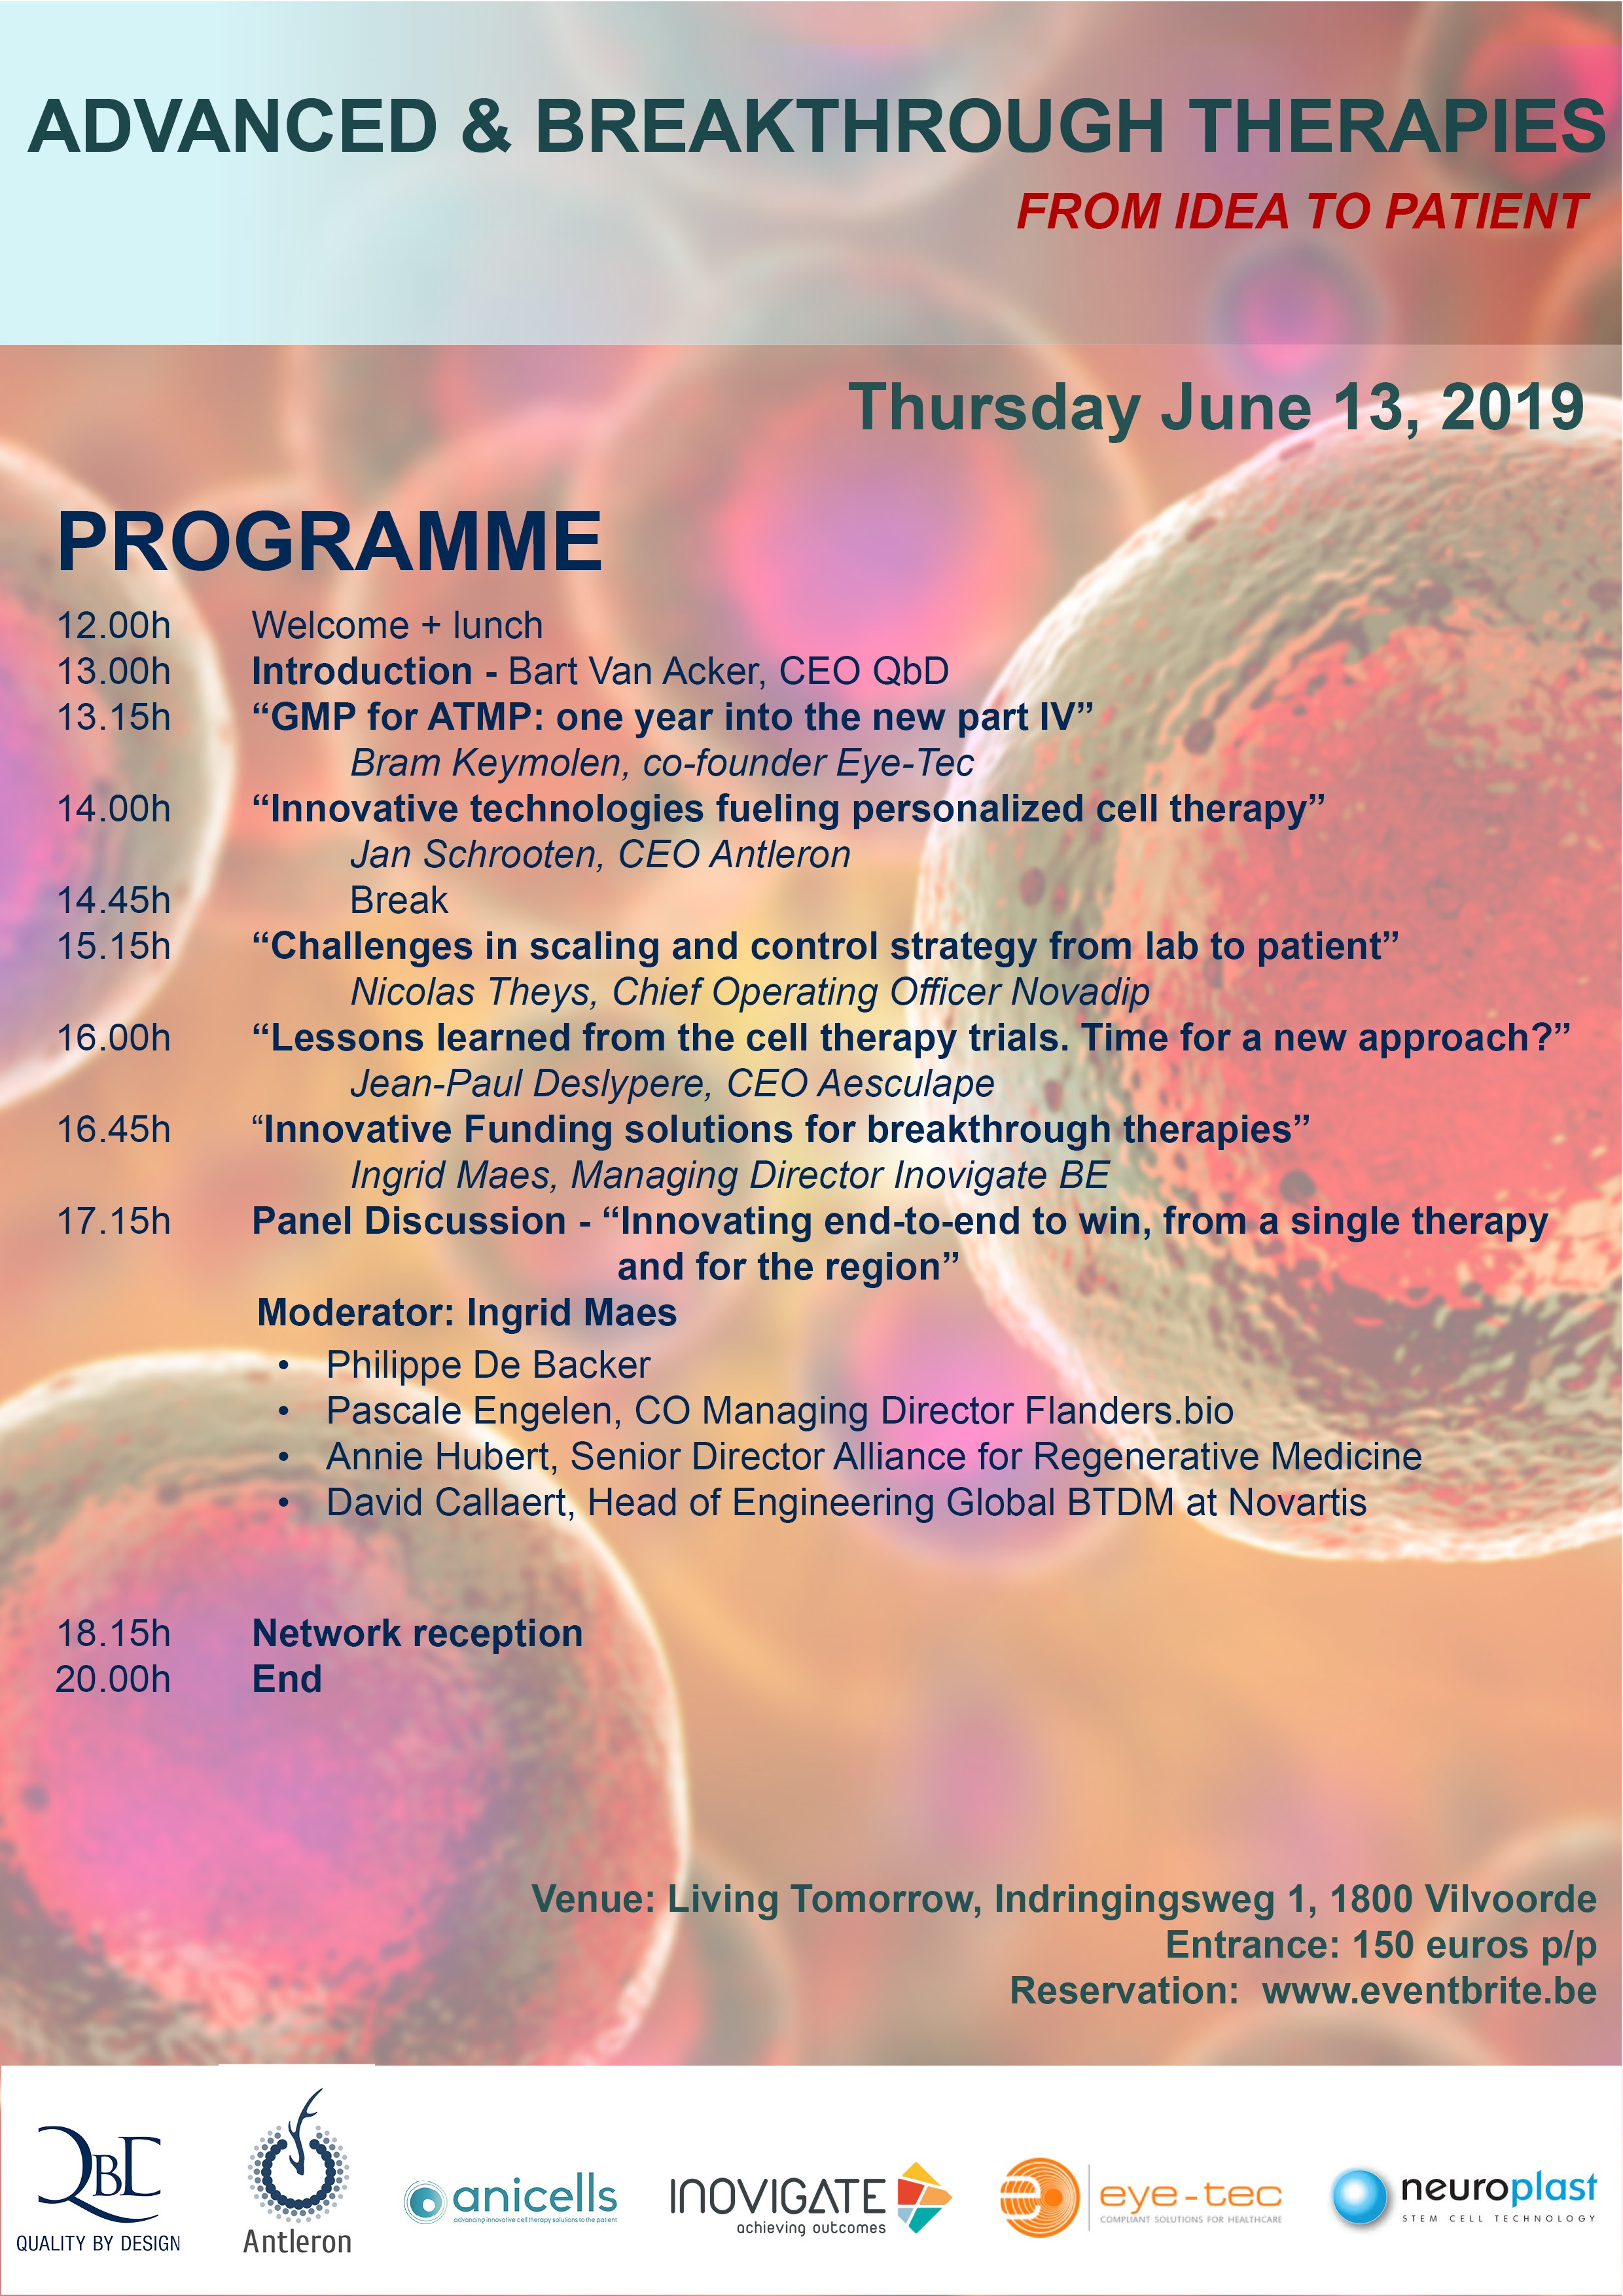 QbD Event: Advanced & Breakthrough therapies, from idea to patient